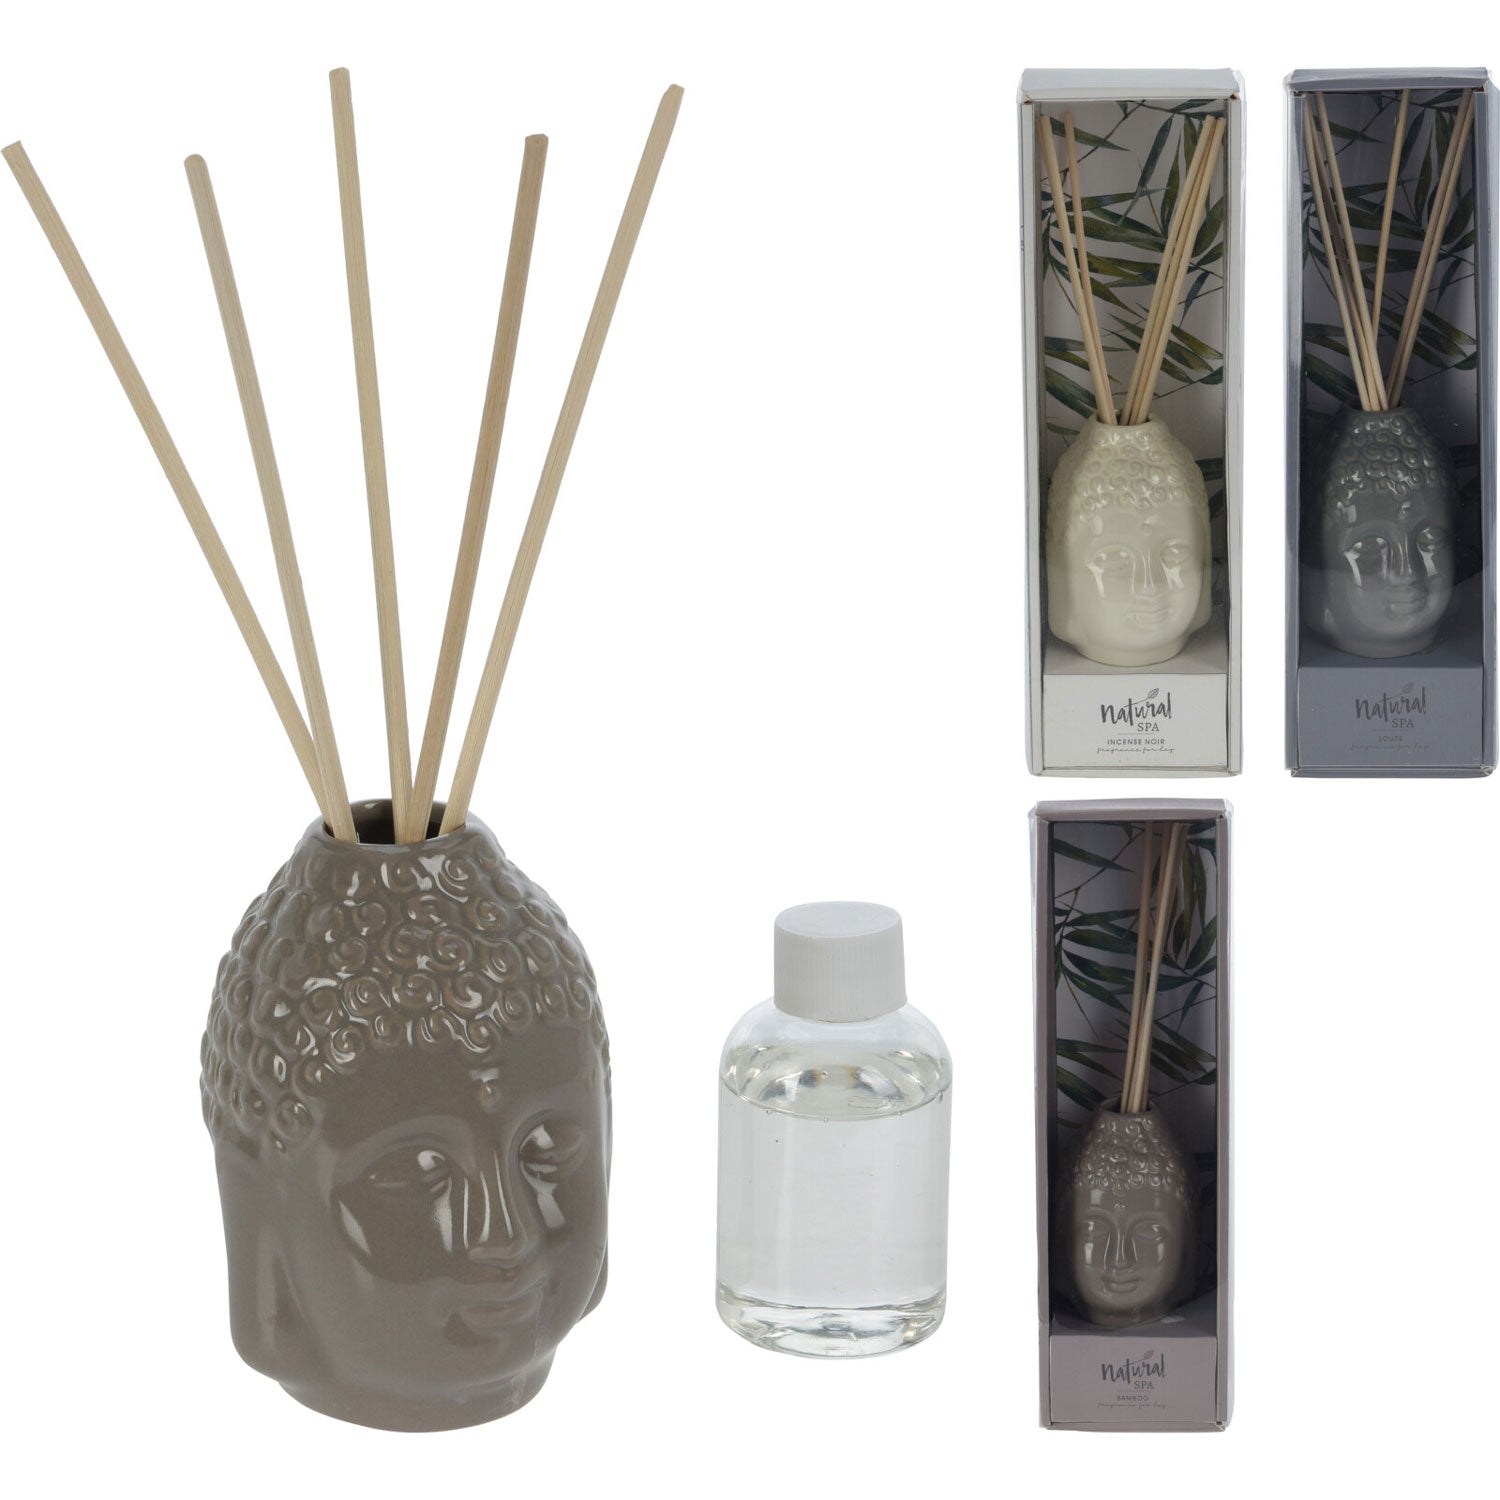 The Home Collection Diffuser Buddah 100ml 1 Shaws Department Stores